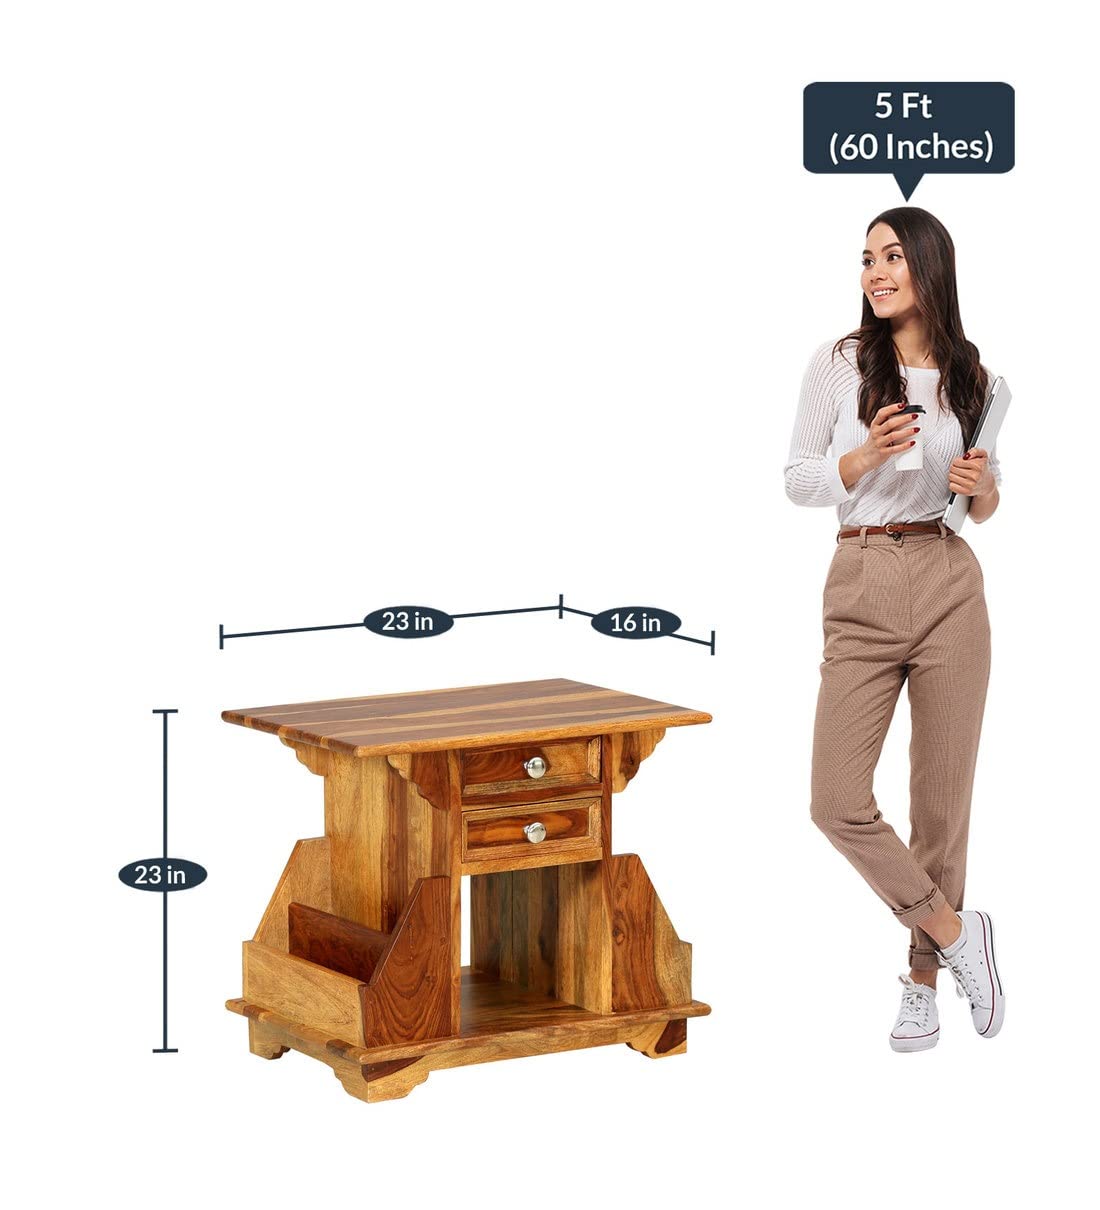 Woodmarwar Solid Sheesham Wood Bedside Table for Bedroom | Solid Wood Bed Side Nightstand End Table with Magazine Holder, 2 Drawer & Shelf Storage for Home & Living Room